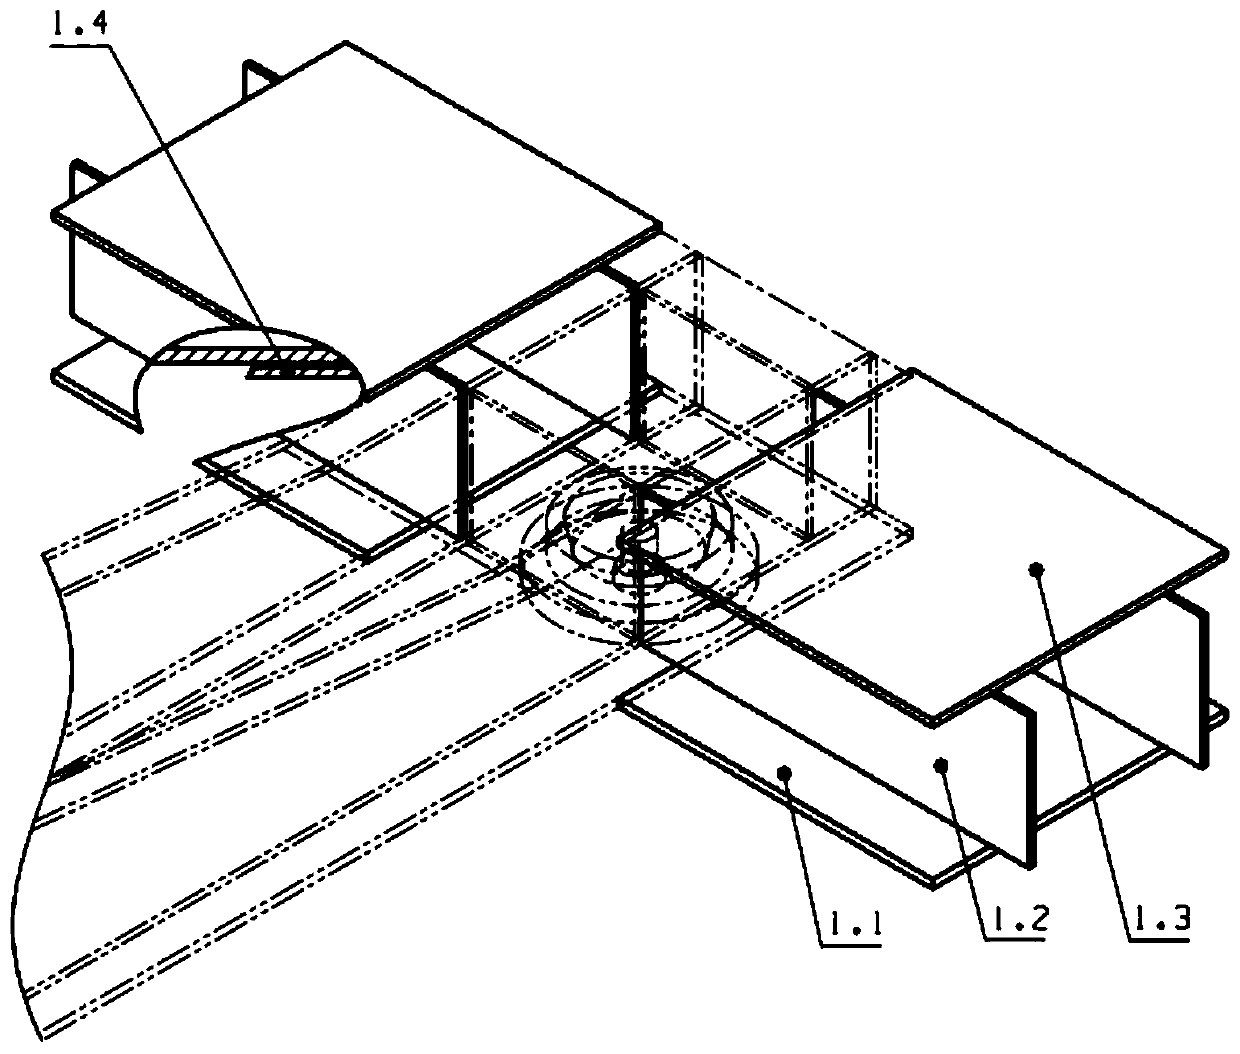 Bearing large underframe of wagon for transporting U-shaped or box type prefabricated beams